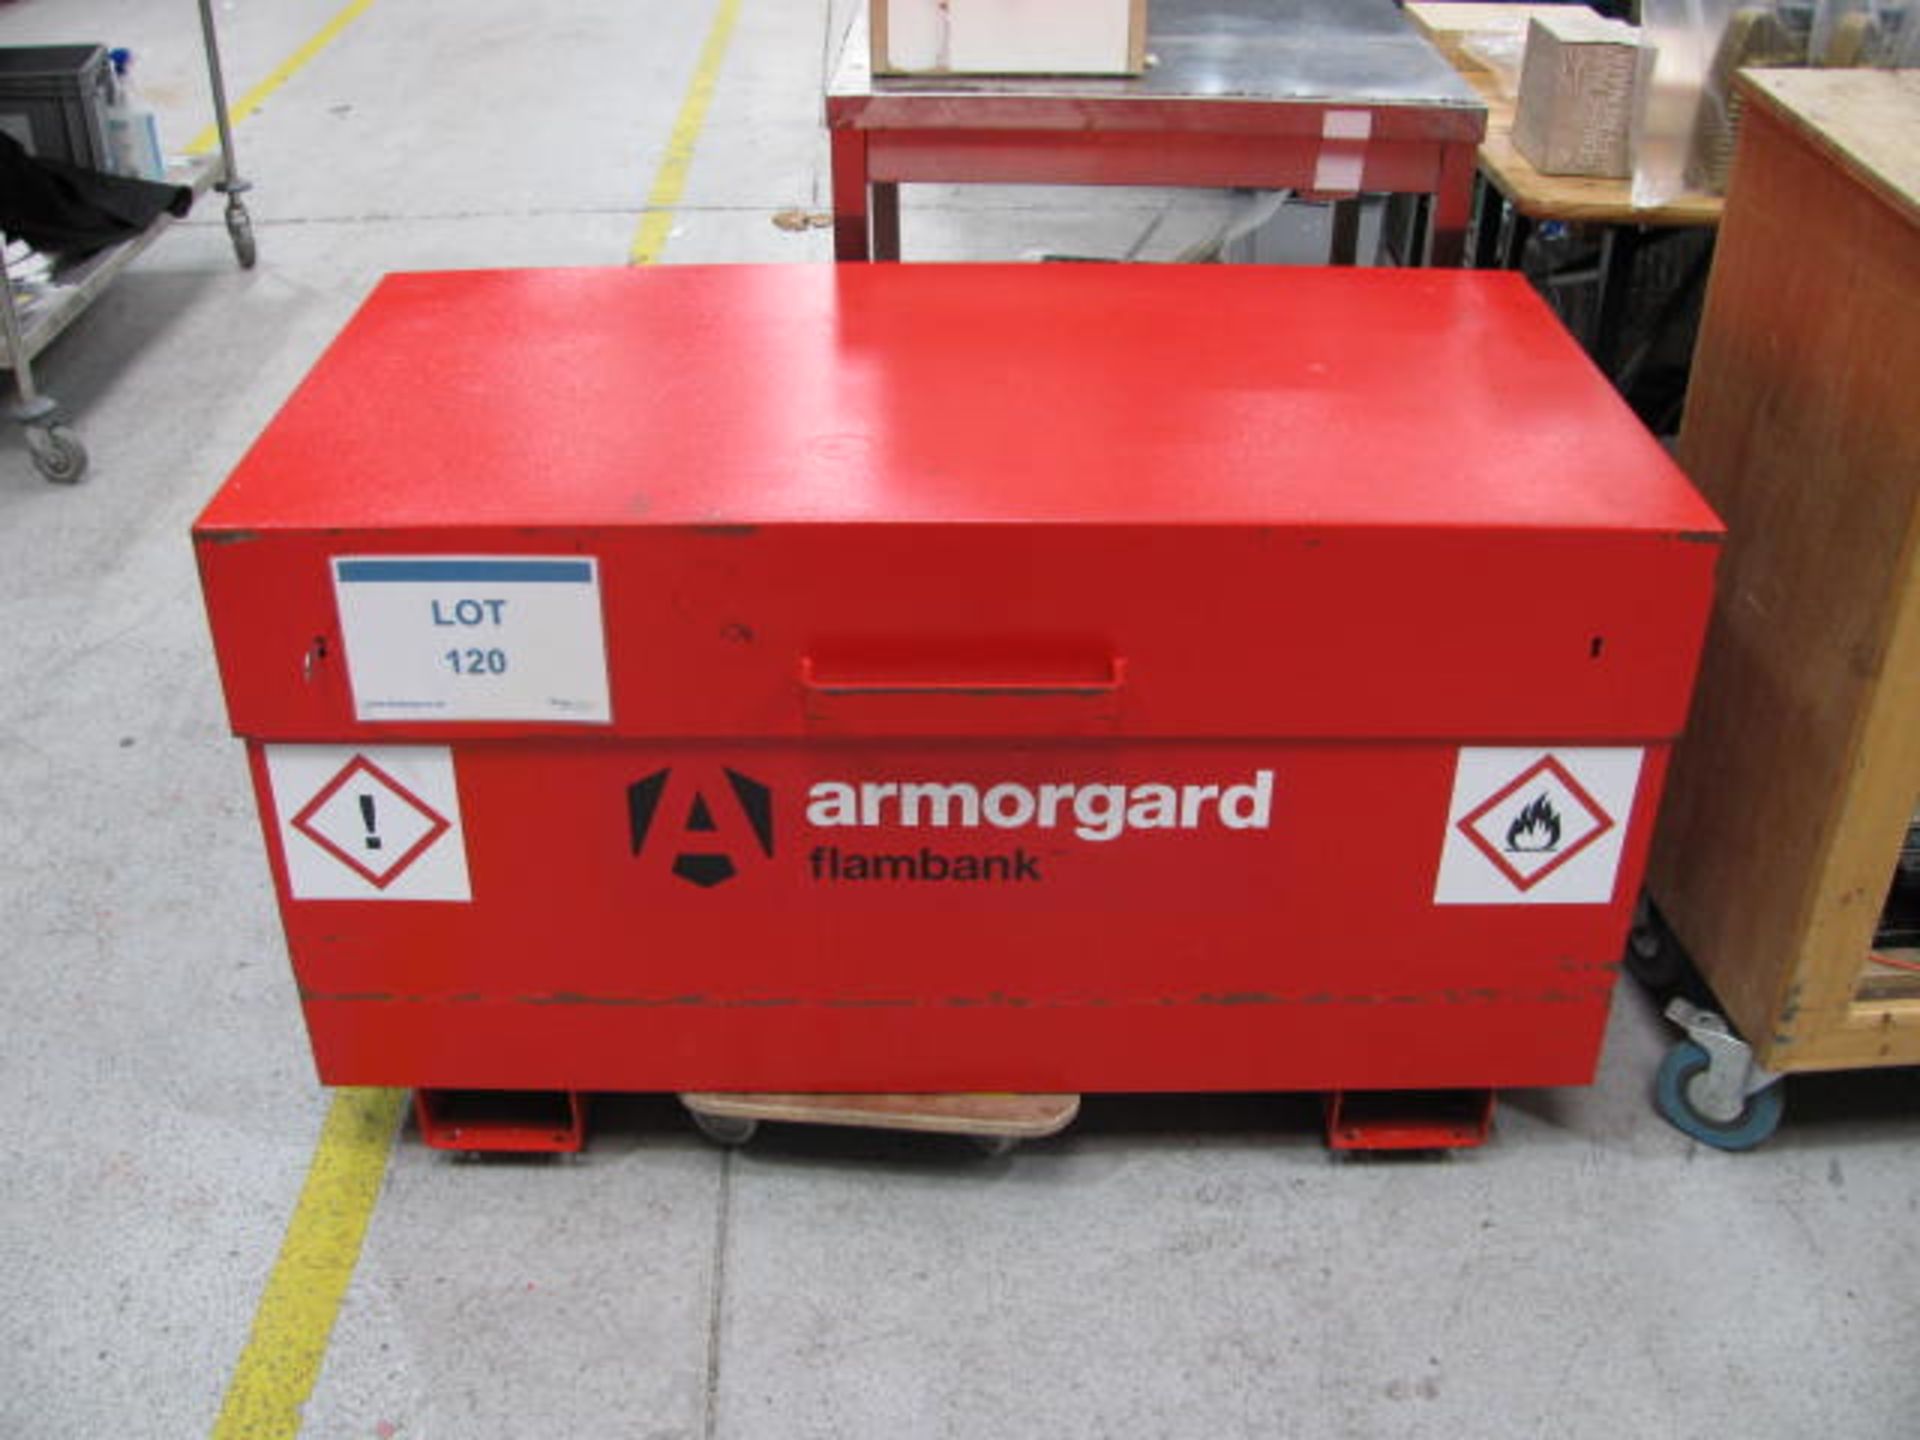 Armorgard flame proof site safe